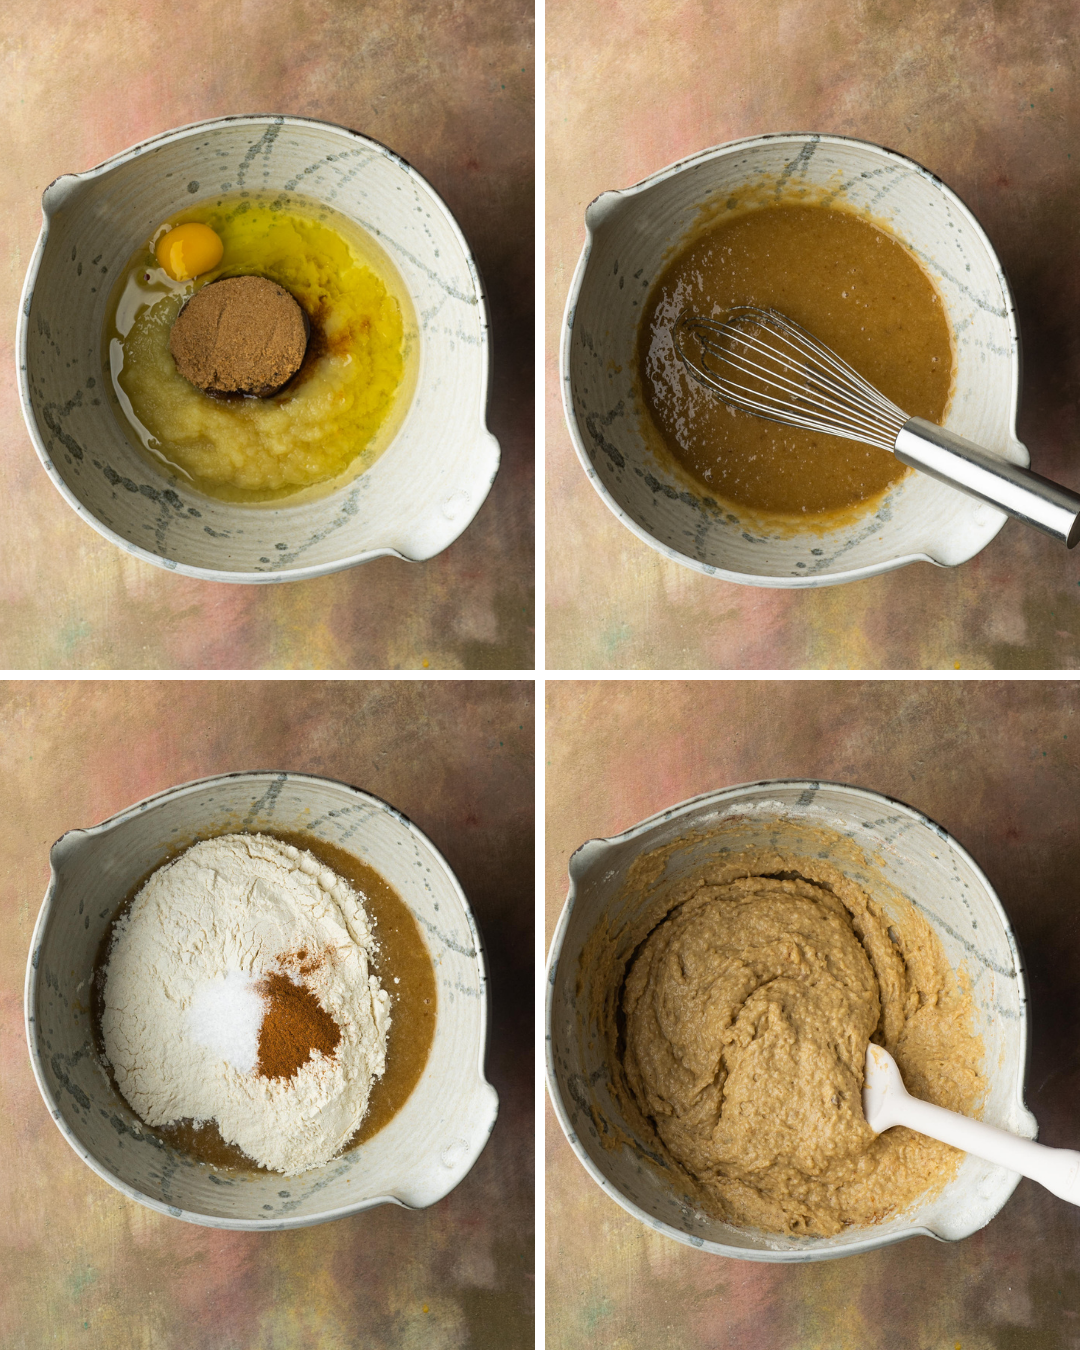 Step by step assembly of apply sauce muffins batter